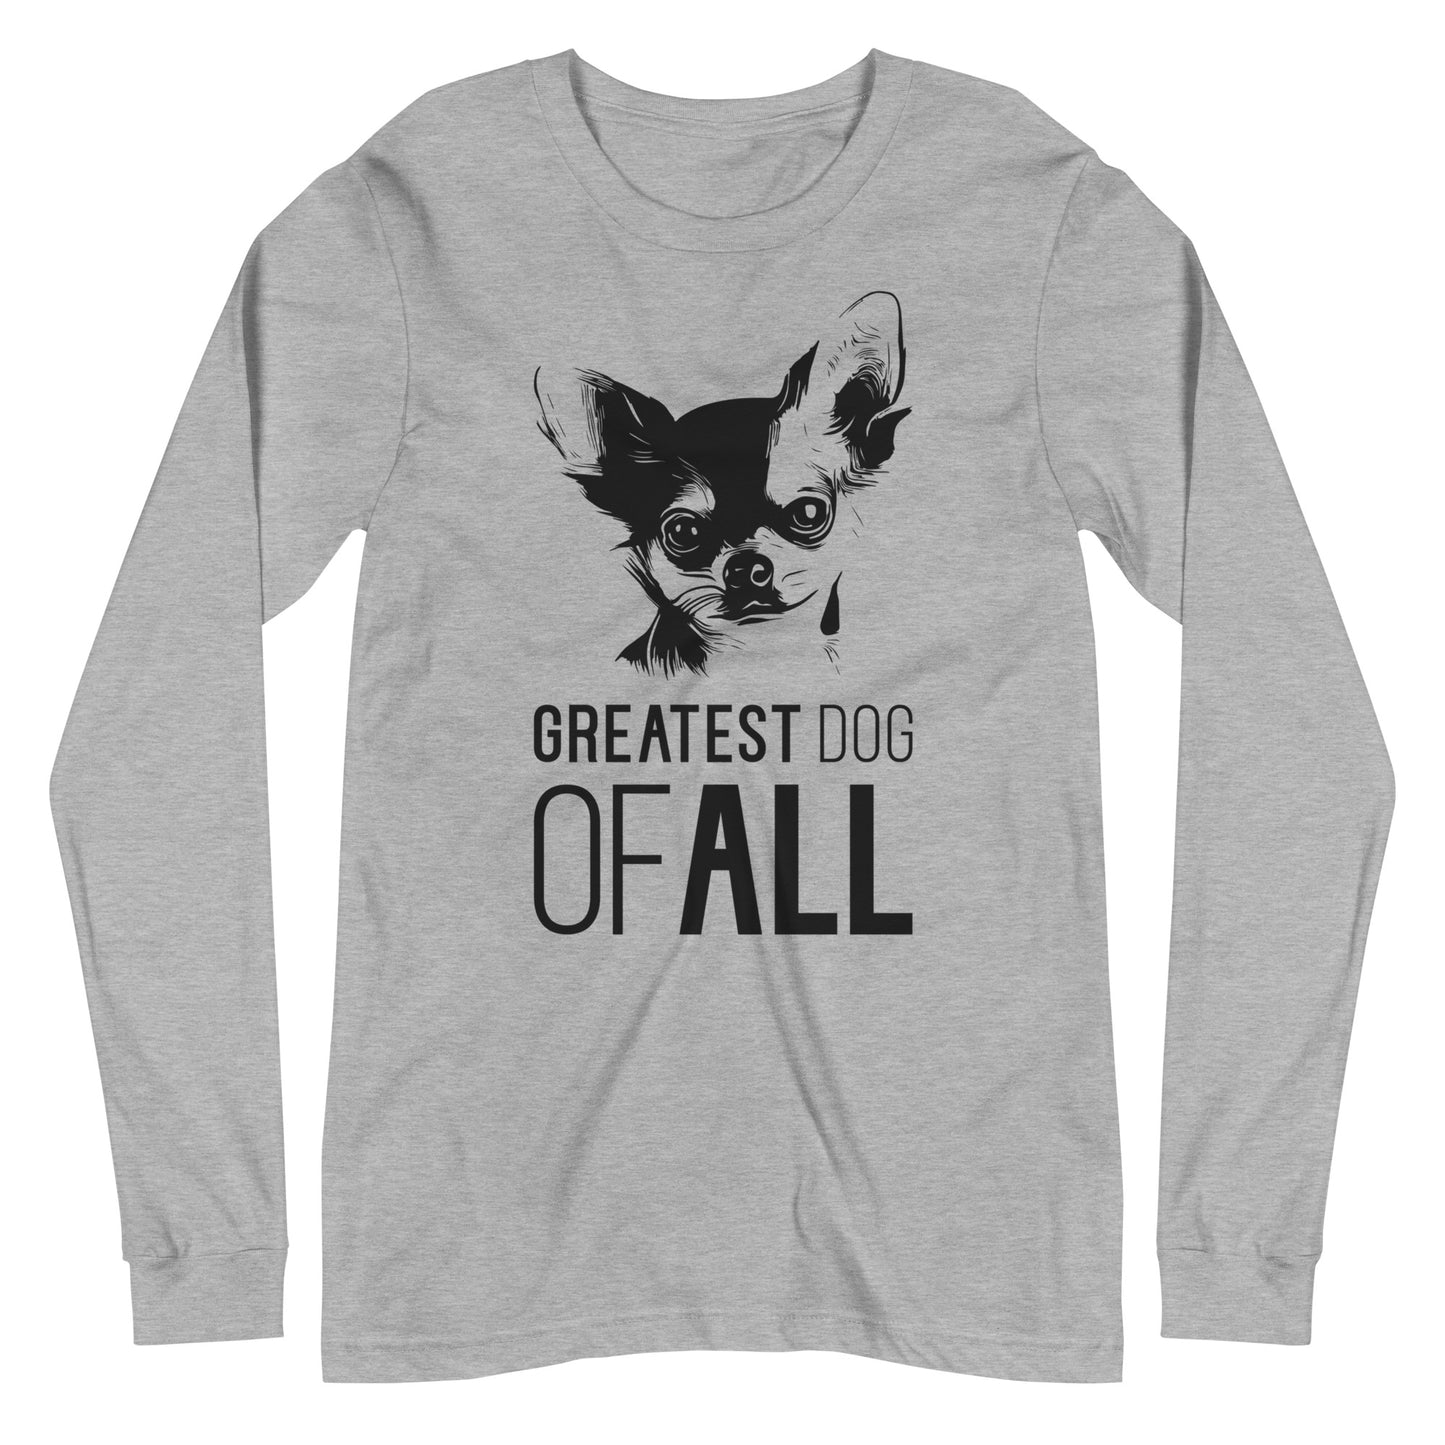 Black Chihuahua face silhouette with Greatest Dog of All caption on unisex athletic heather long sleeve t-shirt